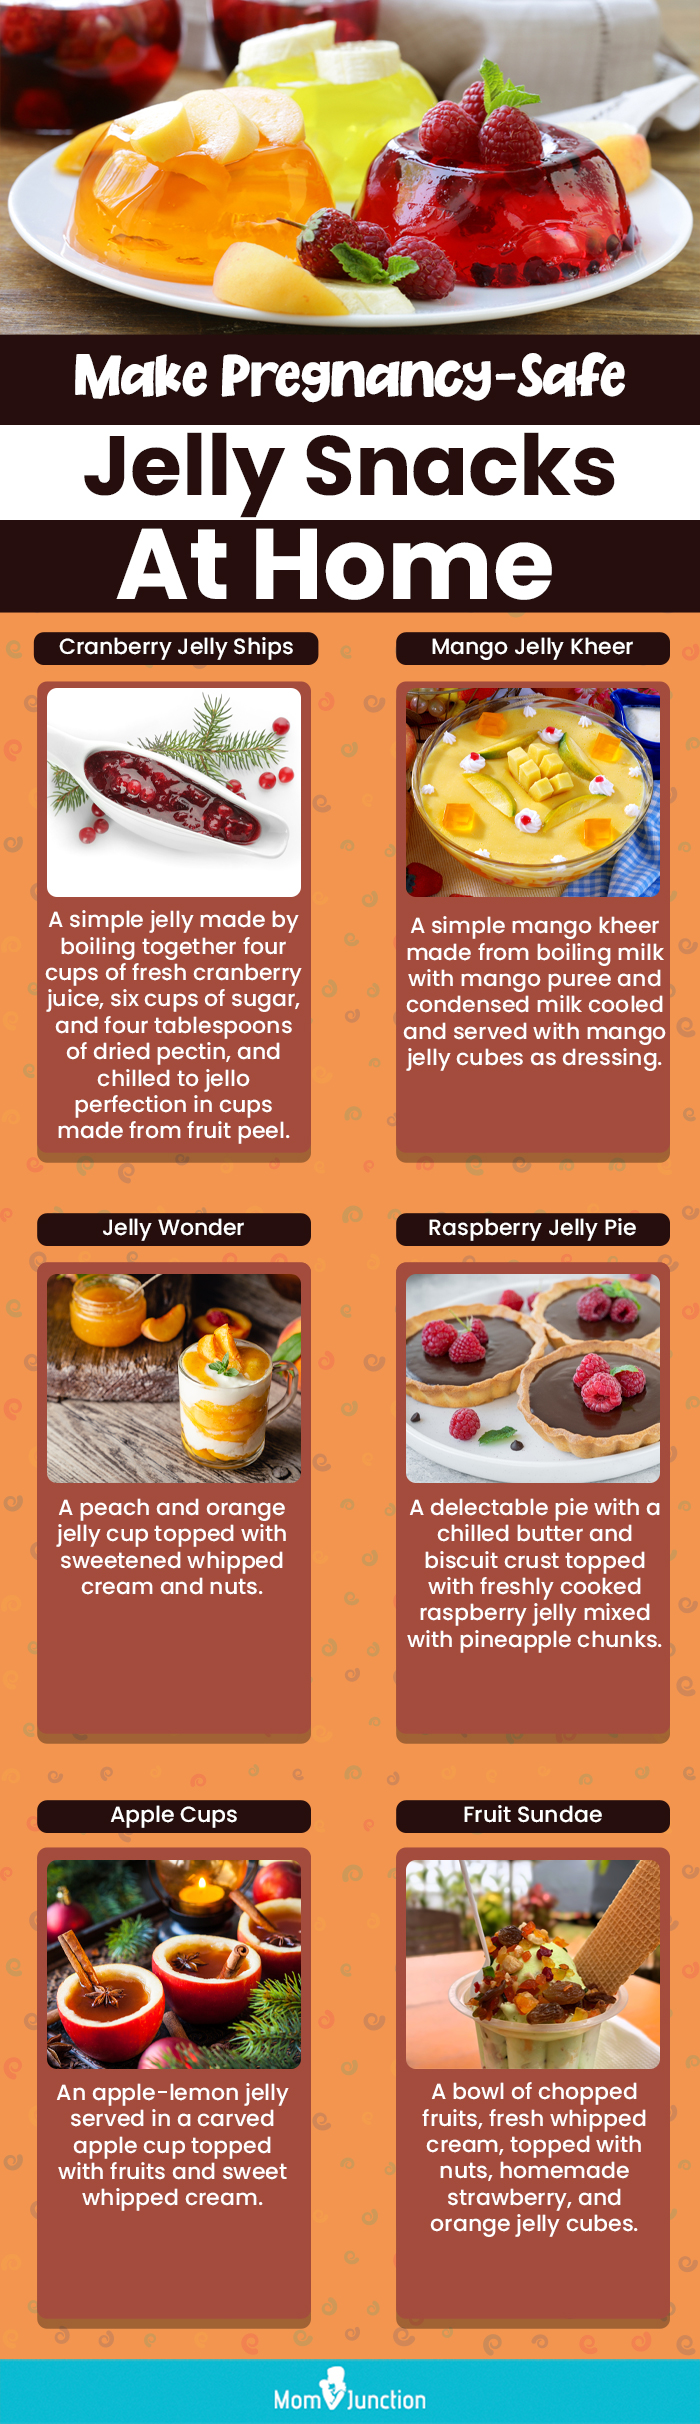 make pregnancy safe jelly snacks at home (infographic)